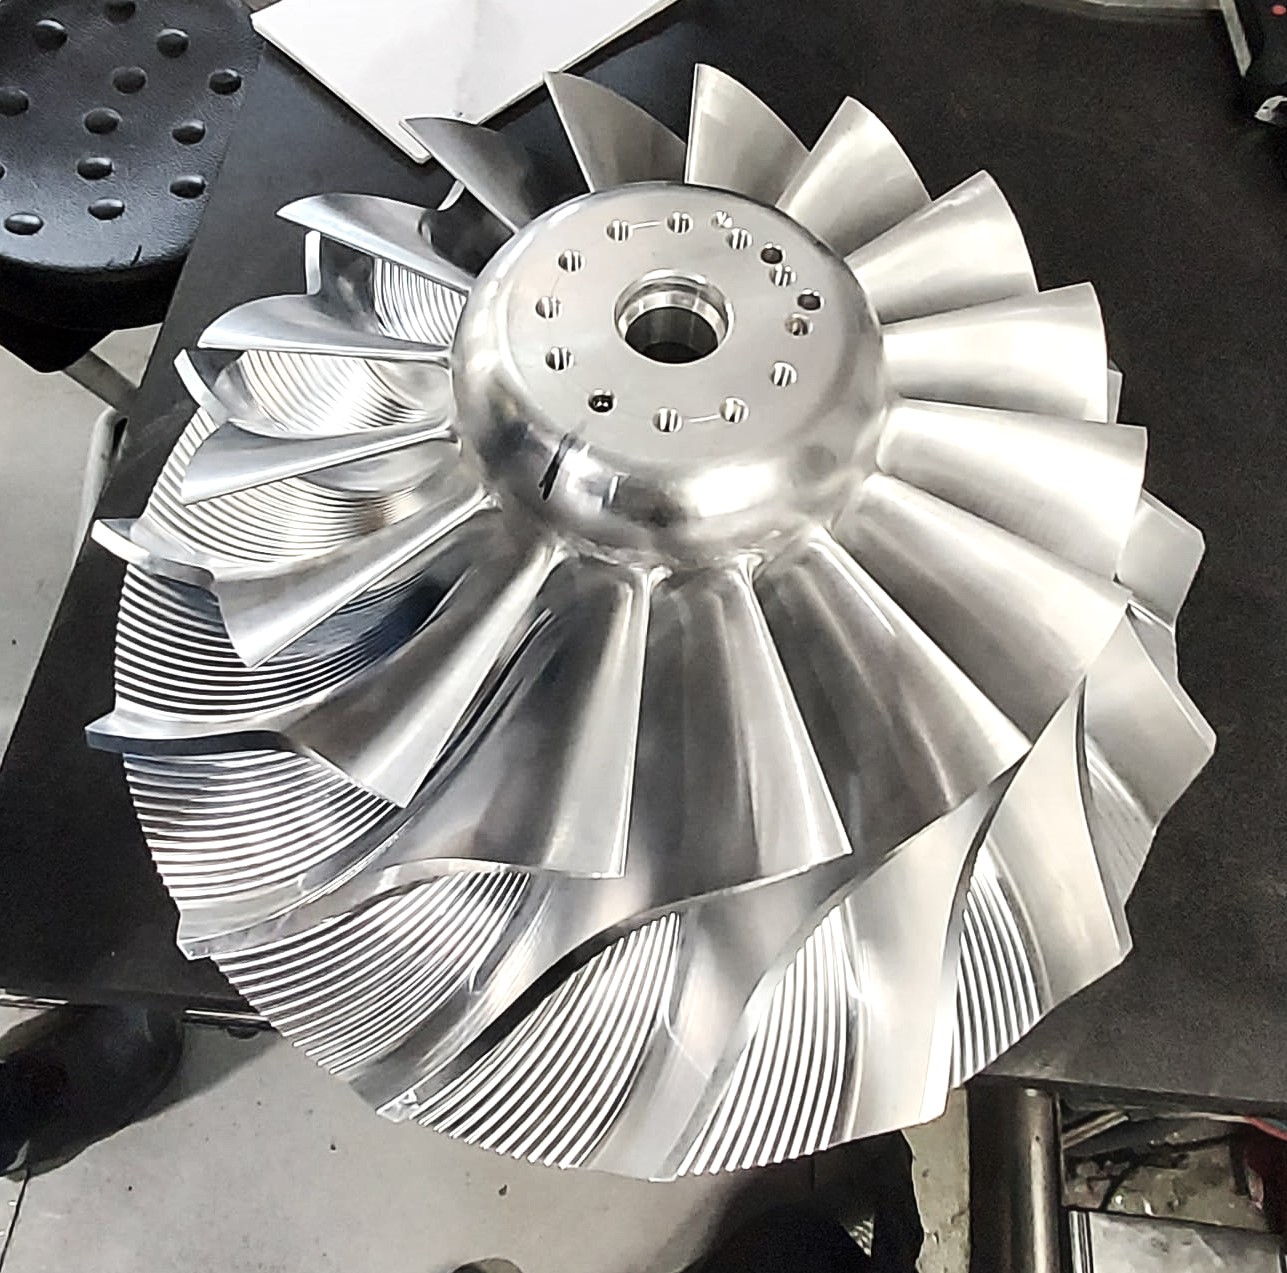 A Comprehensive Inspection Guide for Compressor Wheels and Expander Impellers